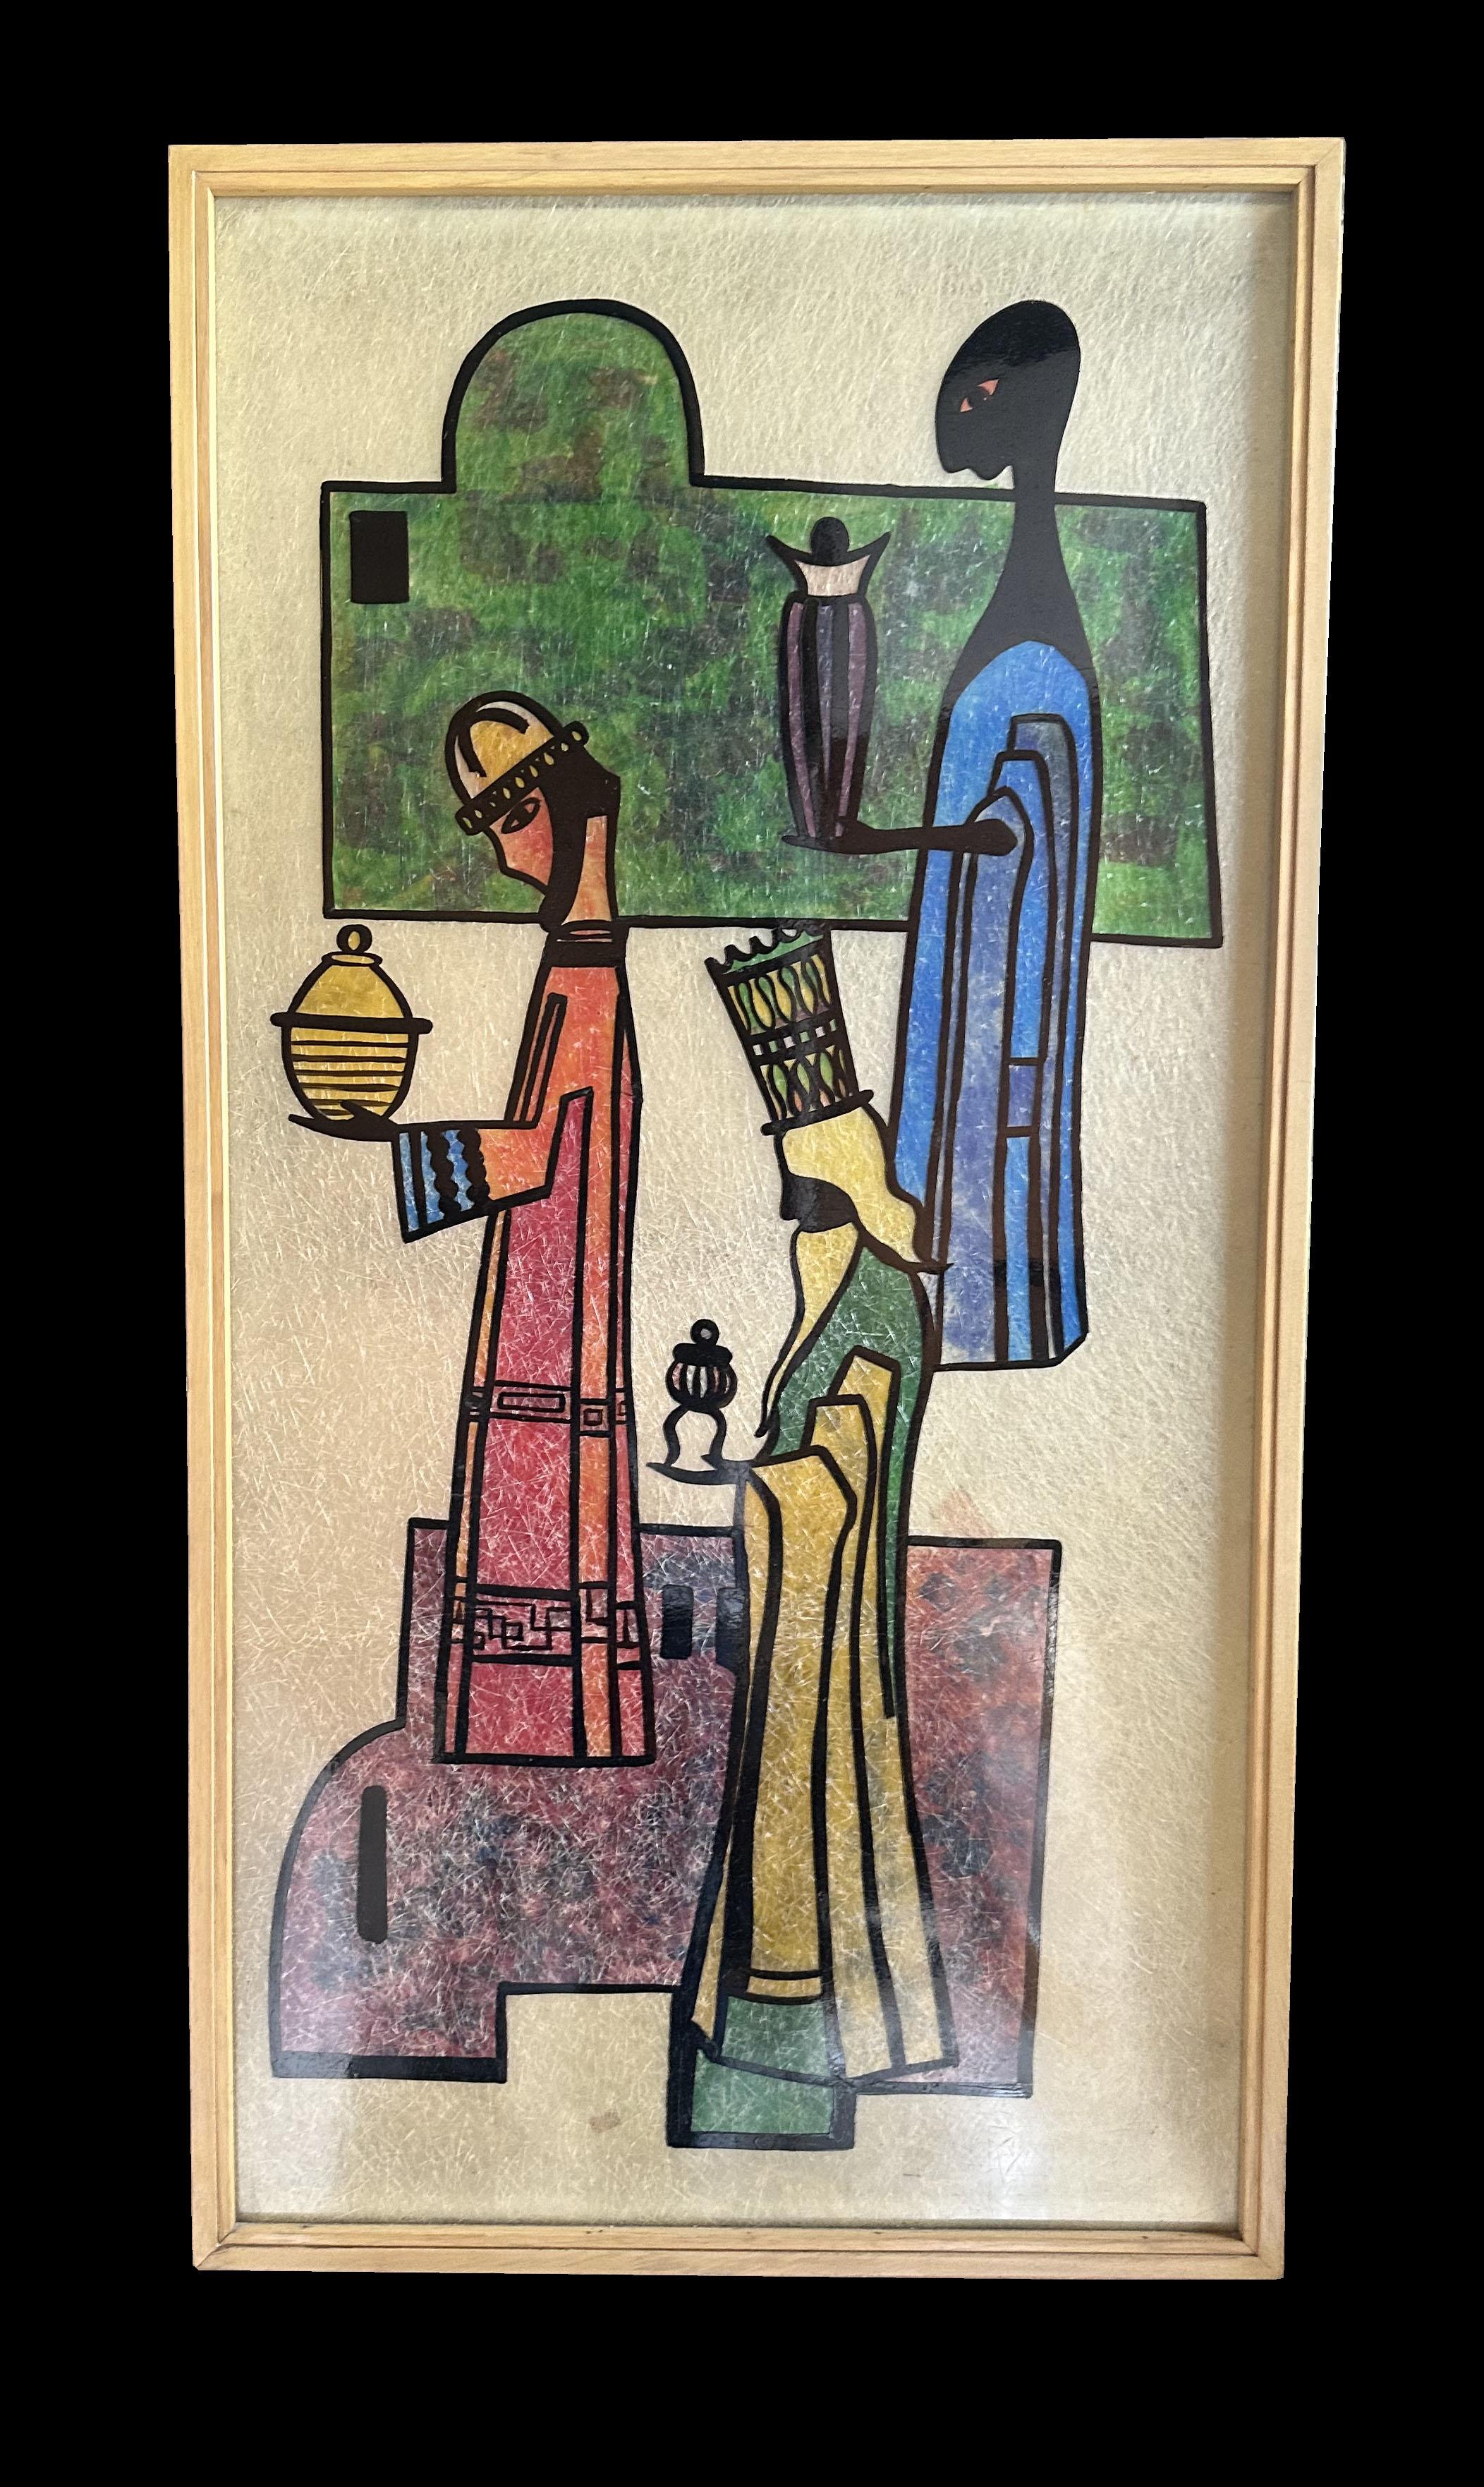 This wonderful backlit painting on fiberglass was original to an architect designed home and was unique to this property. Unfortunately we have been unable to trace the artist yet but there are many details that draw on influences of contemporary